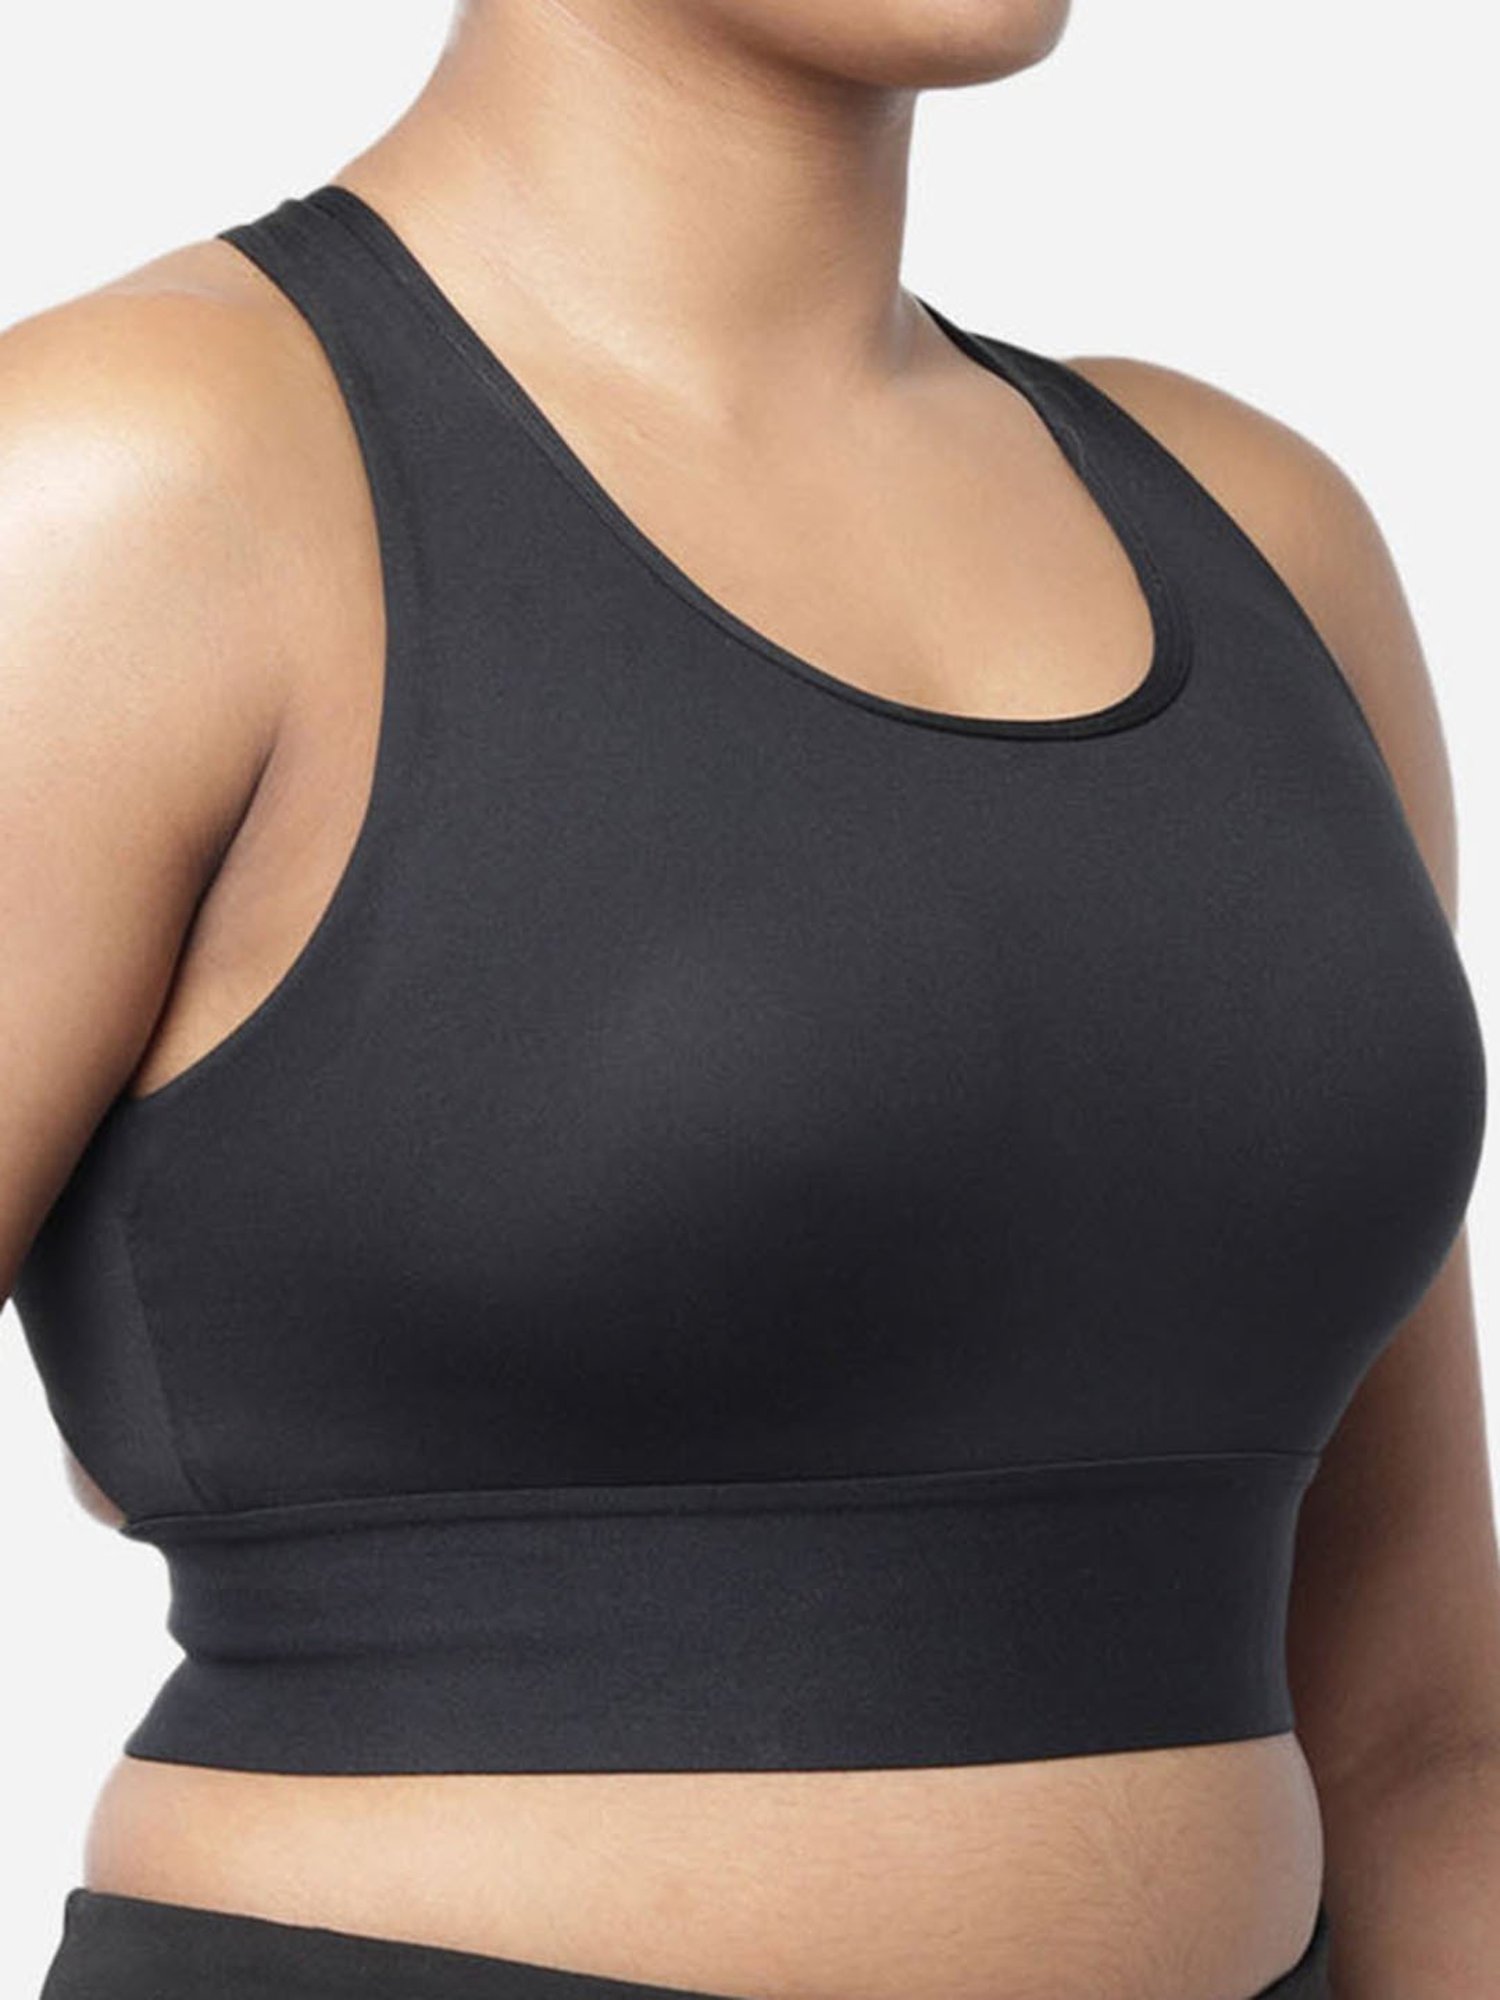 Buy BlissClub Women Flex-It Moulded Sports Bra, Moulded Removable Cups, Wide Straps, No-Dig Underband